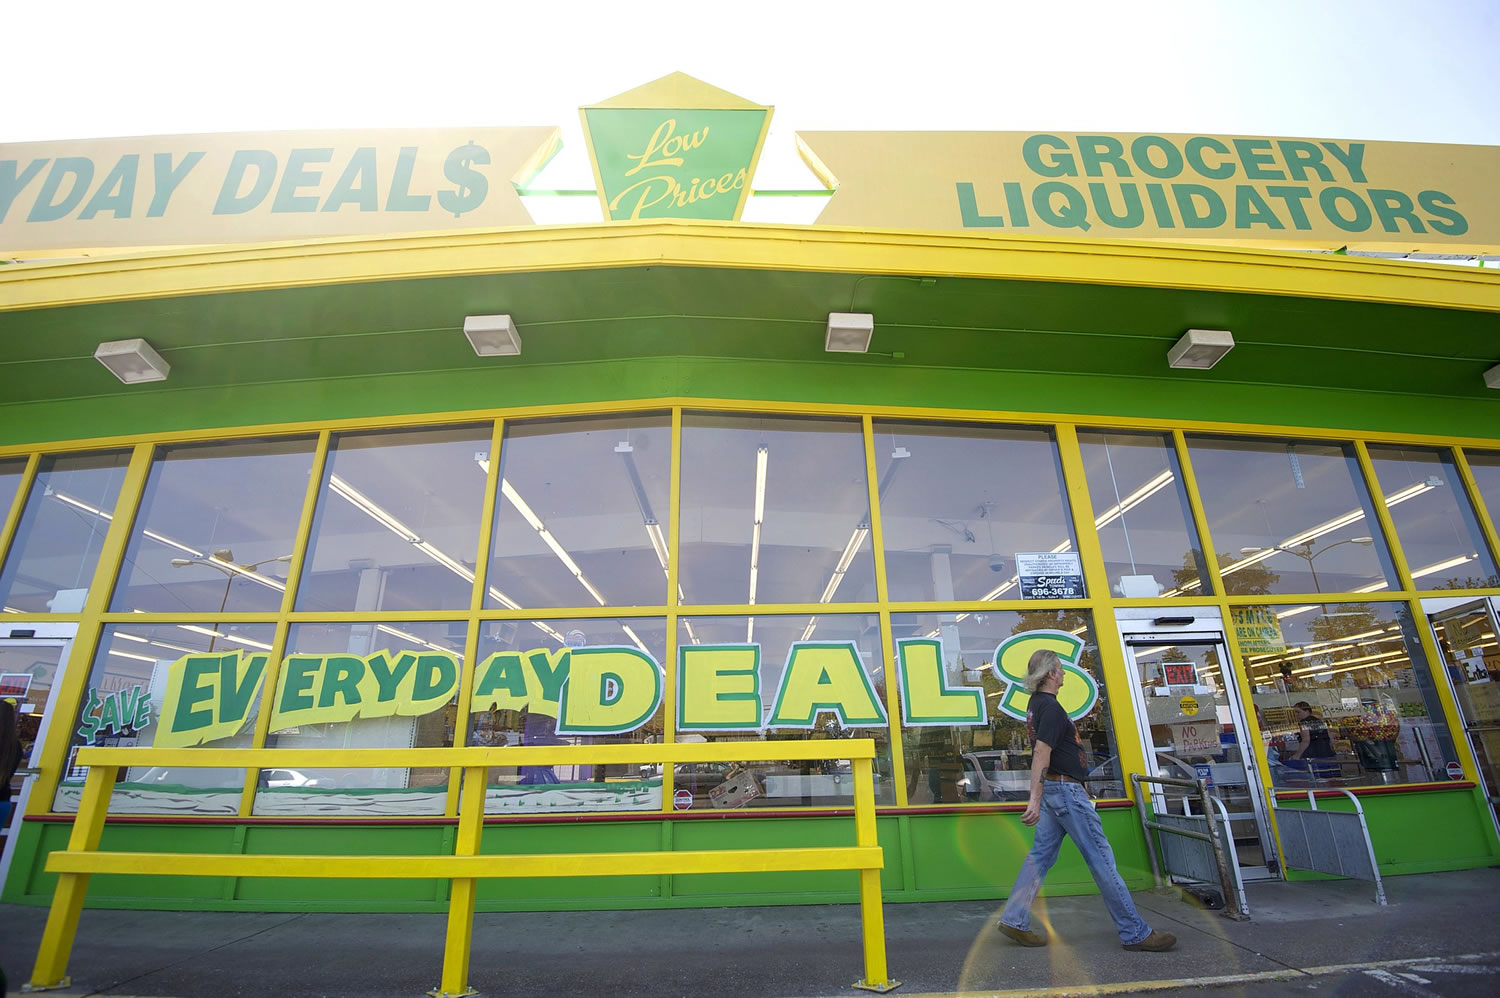 Everyday Deals, a discount grocery store, opened last month in the former St. Johns IGA building and is already exceeding sales expectations.